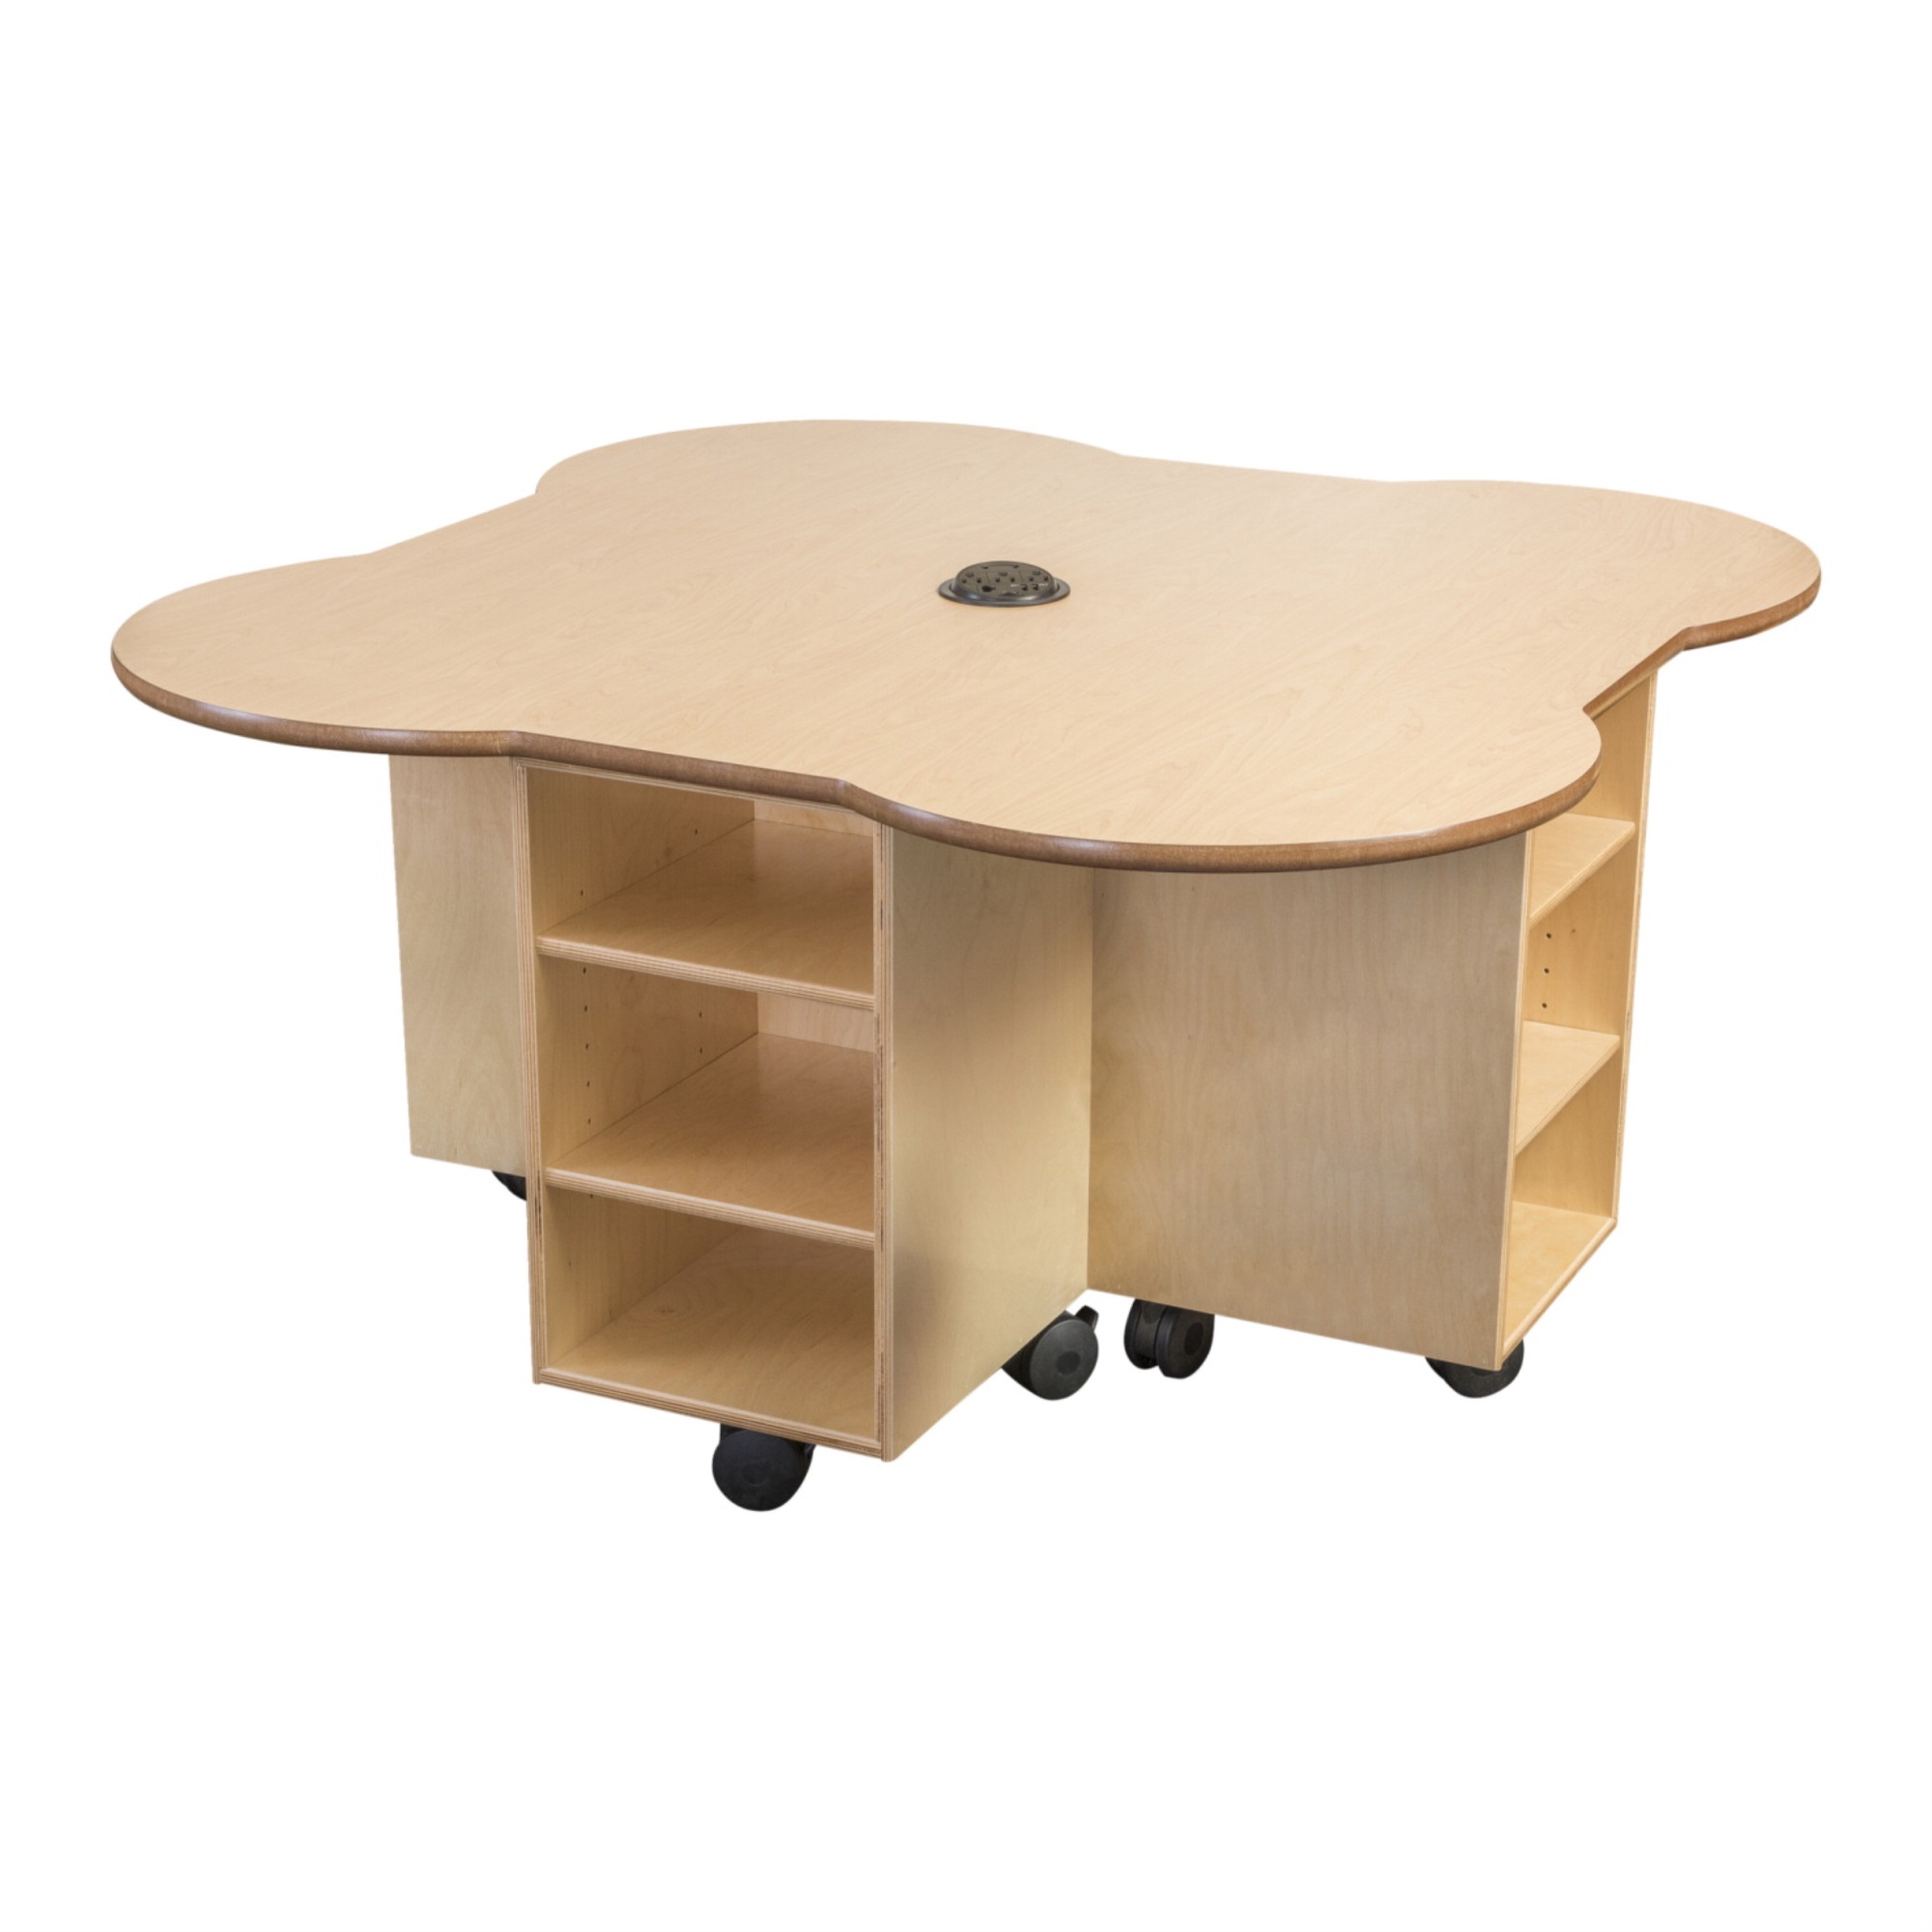 Childcraft Mobile STEAM Table, 47-3/4 x 47-3/4 x 25 Inches